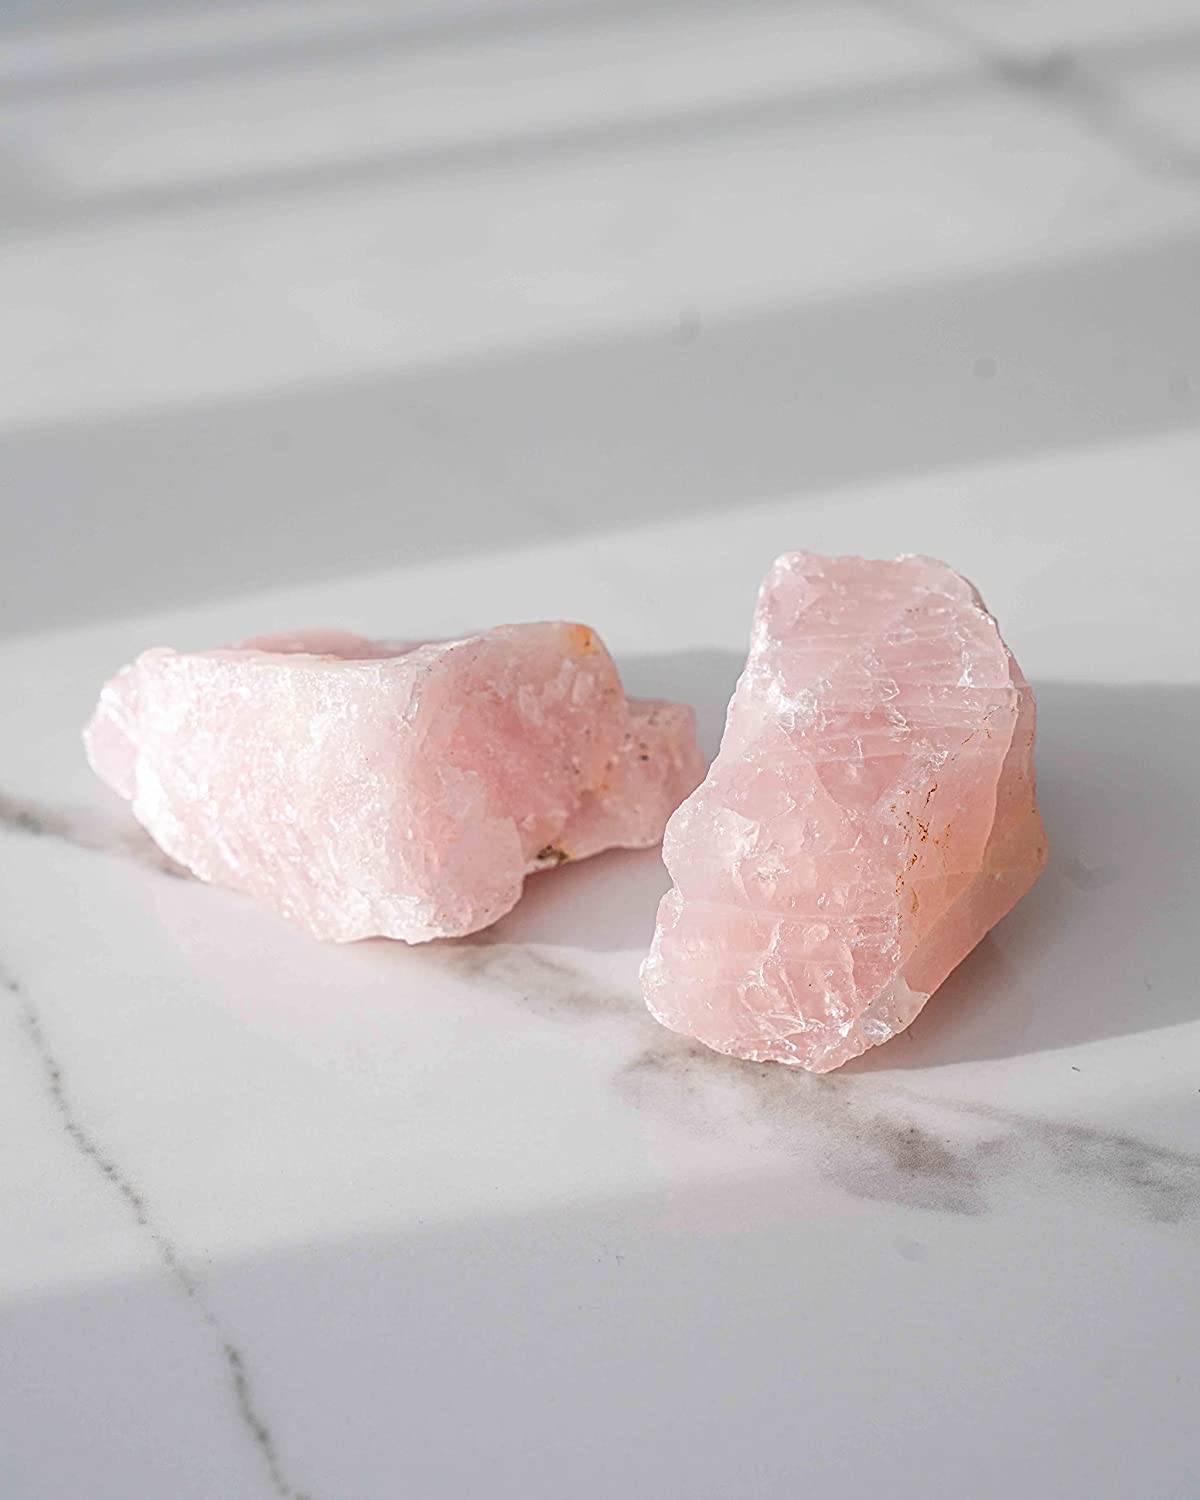 1 lb Bulk of Natural Raw Rose Quartz Stones with Carry-On Crafted Fabric Bag for Wicca, Reiki & Crystal Healing